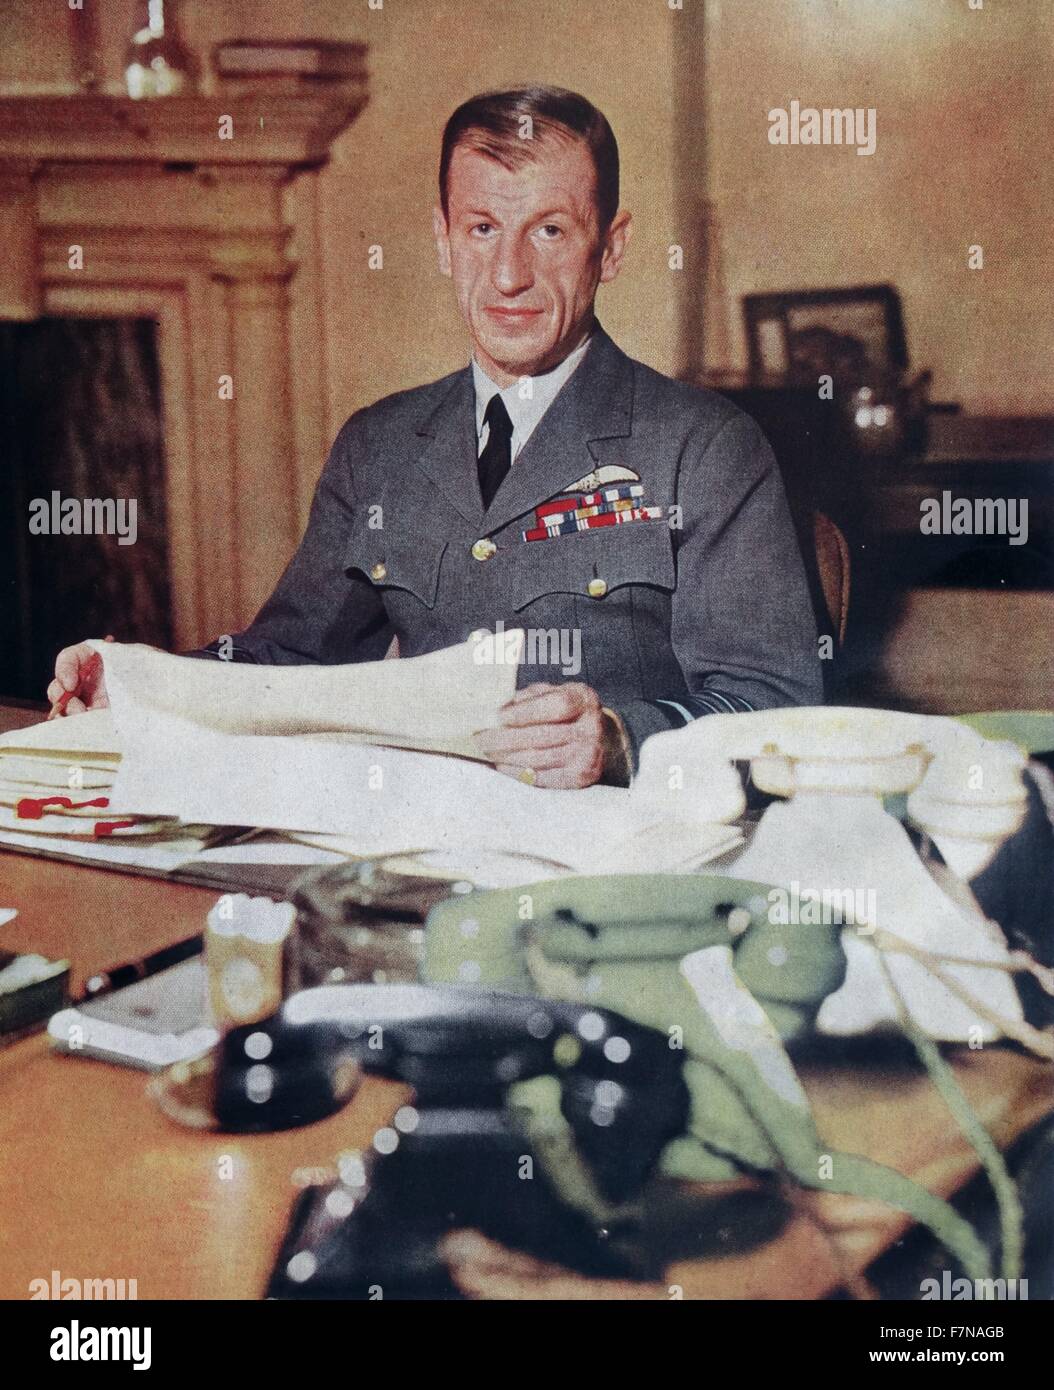 Colour photograph of Air Chief Marshal Sir Charles Portal (1893-1971) Marshal of the Royal Air Force Charles Frederick Algernon Portal, 1st Viscount Portal of Hungerford KG, GCB, OM, DSO & Bar, MC was a senior Royal Air Force officer. Dated 1940 Stock Photo